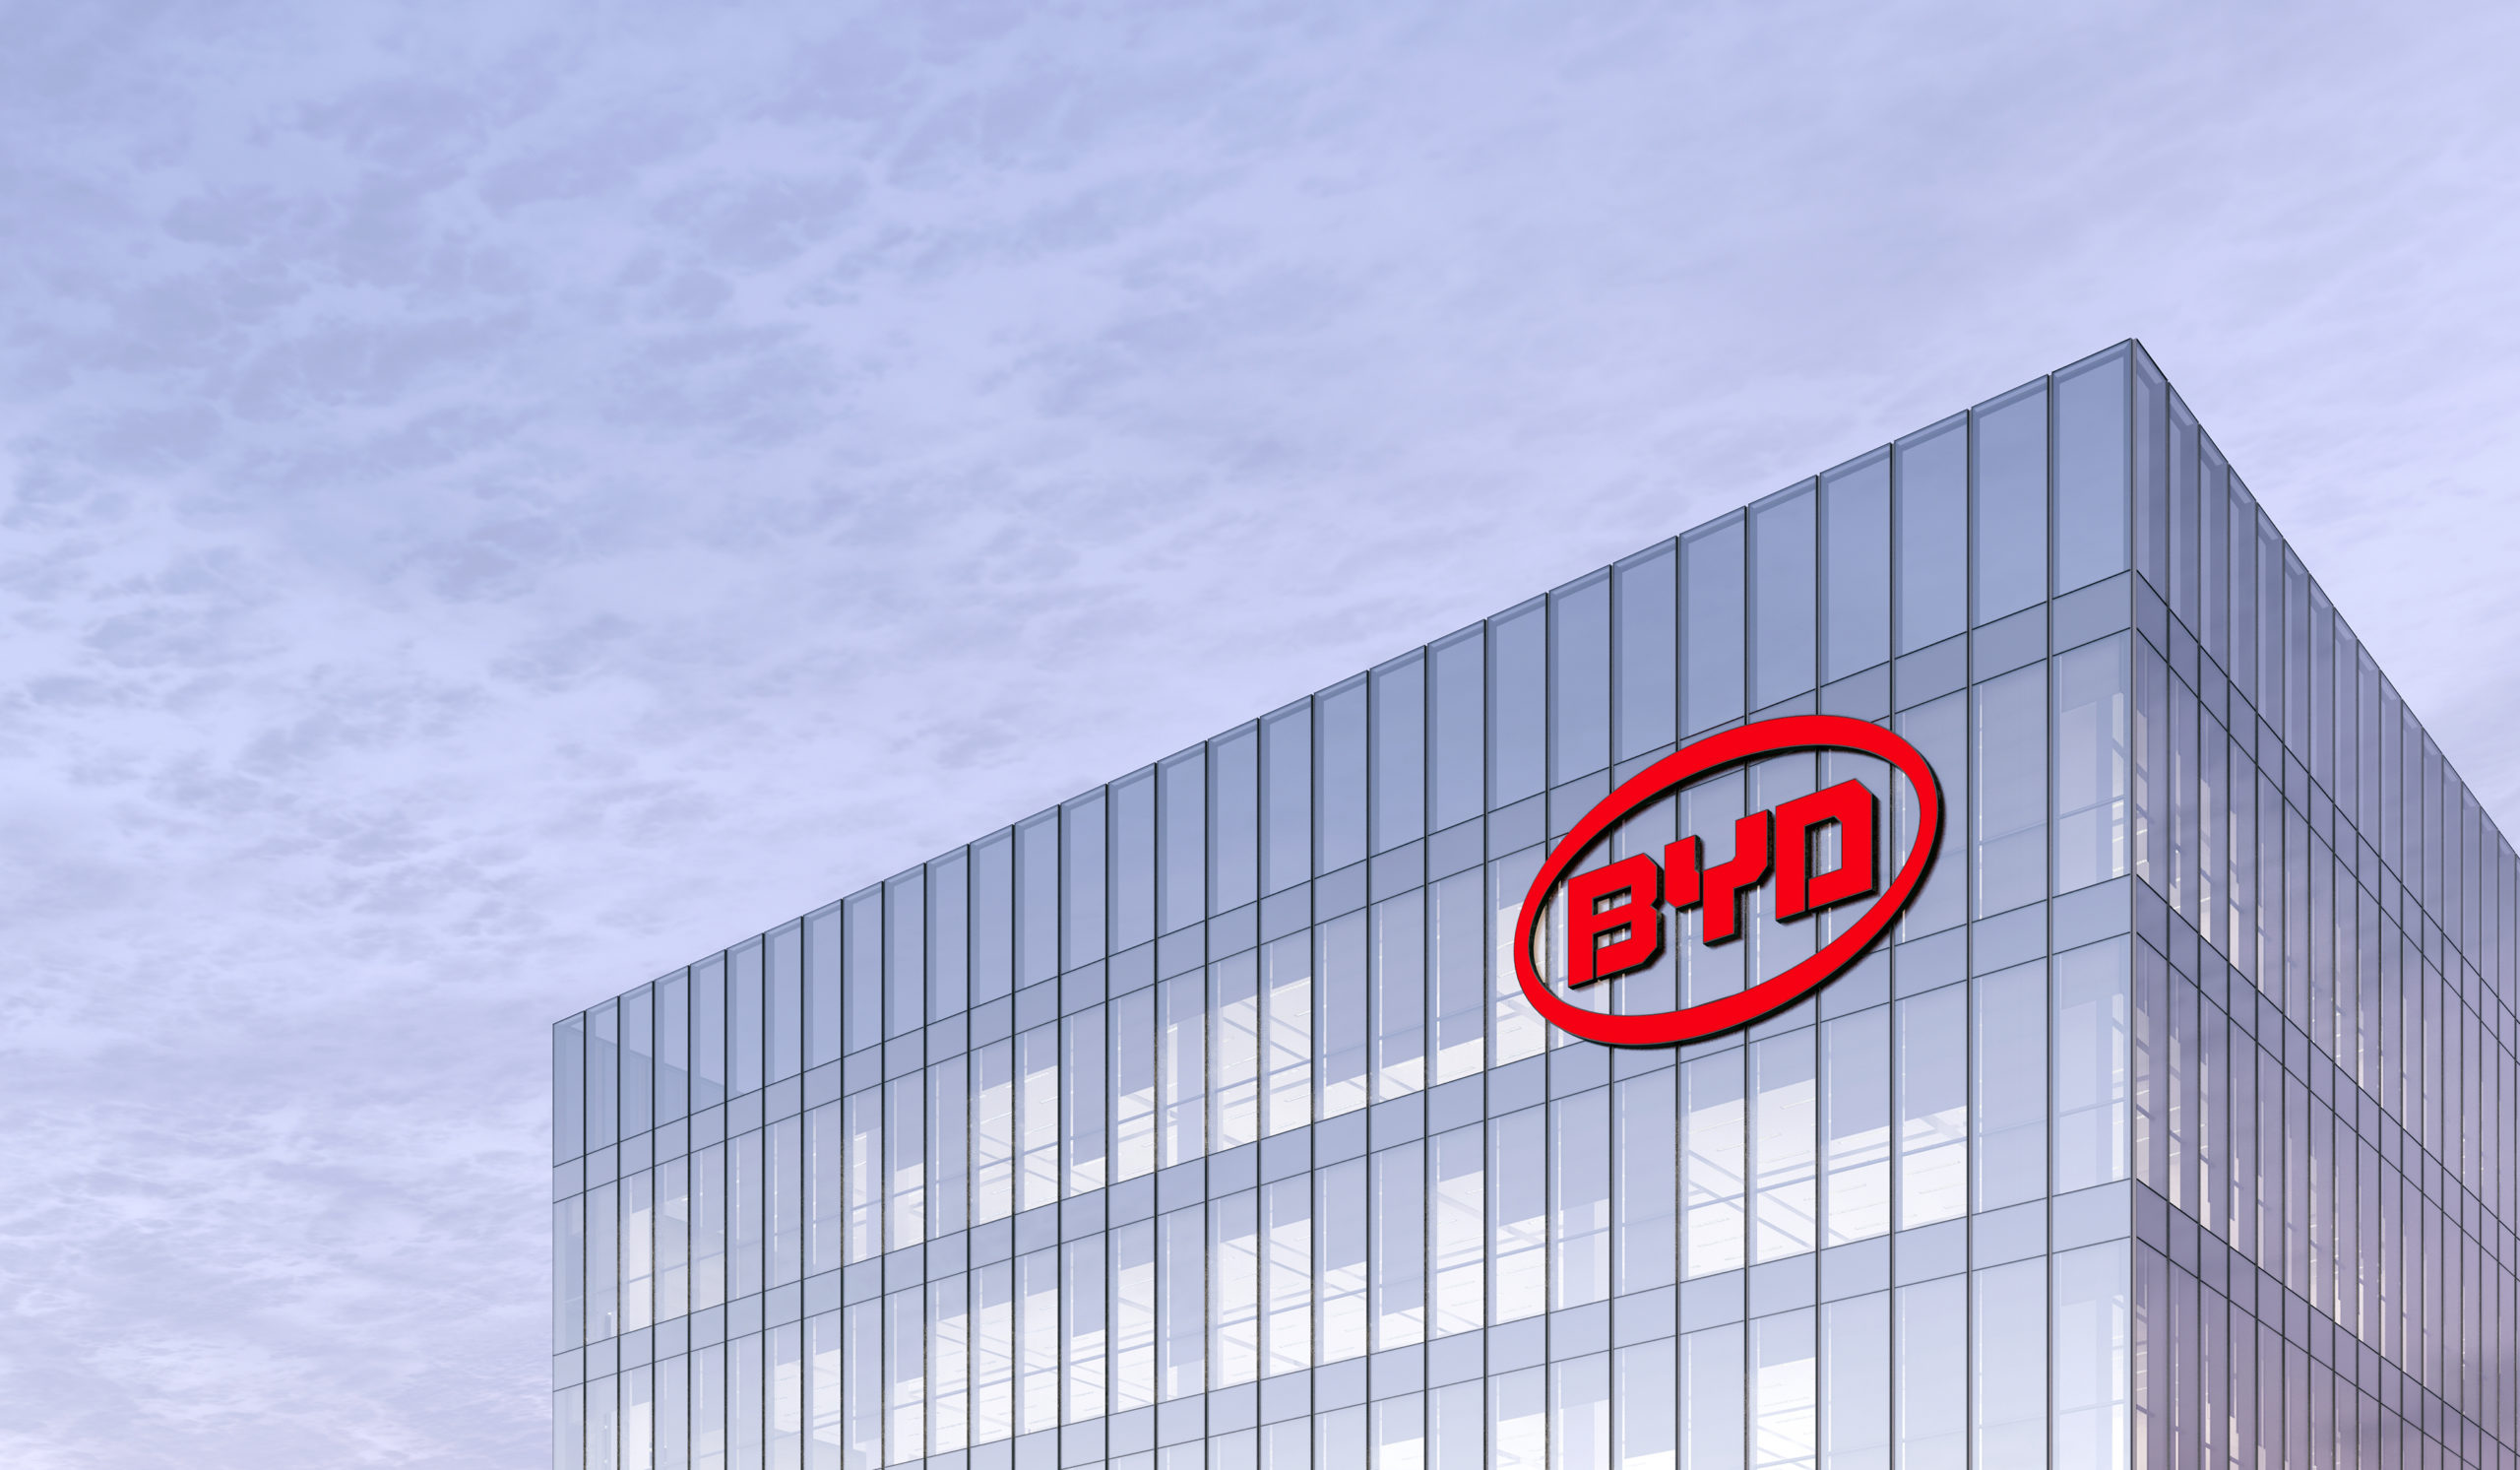 BYD: The new energy vehicle market will enter the knockout round in 2023 | The company has pricing power in the range of 100,000-200,000 yuan